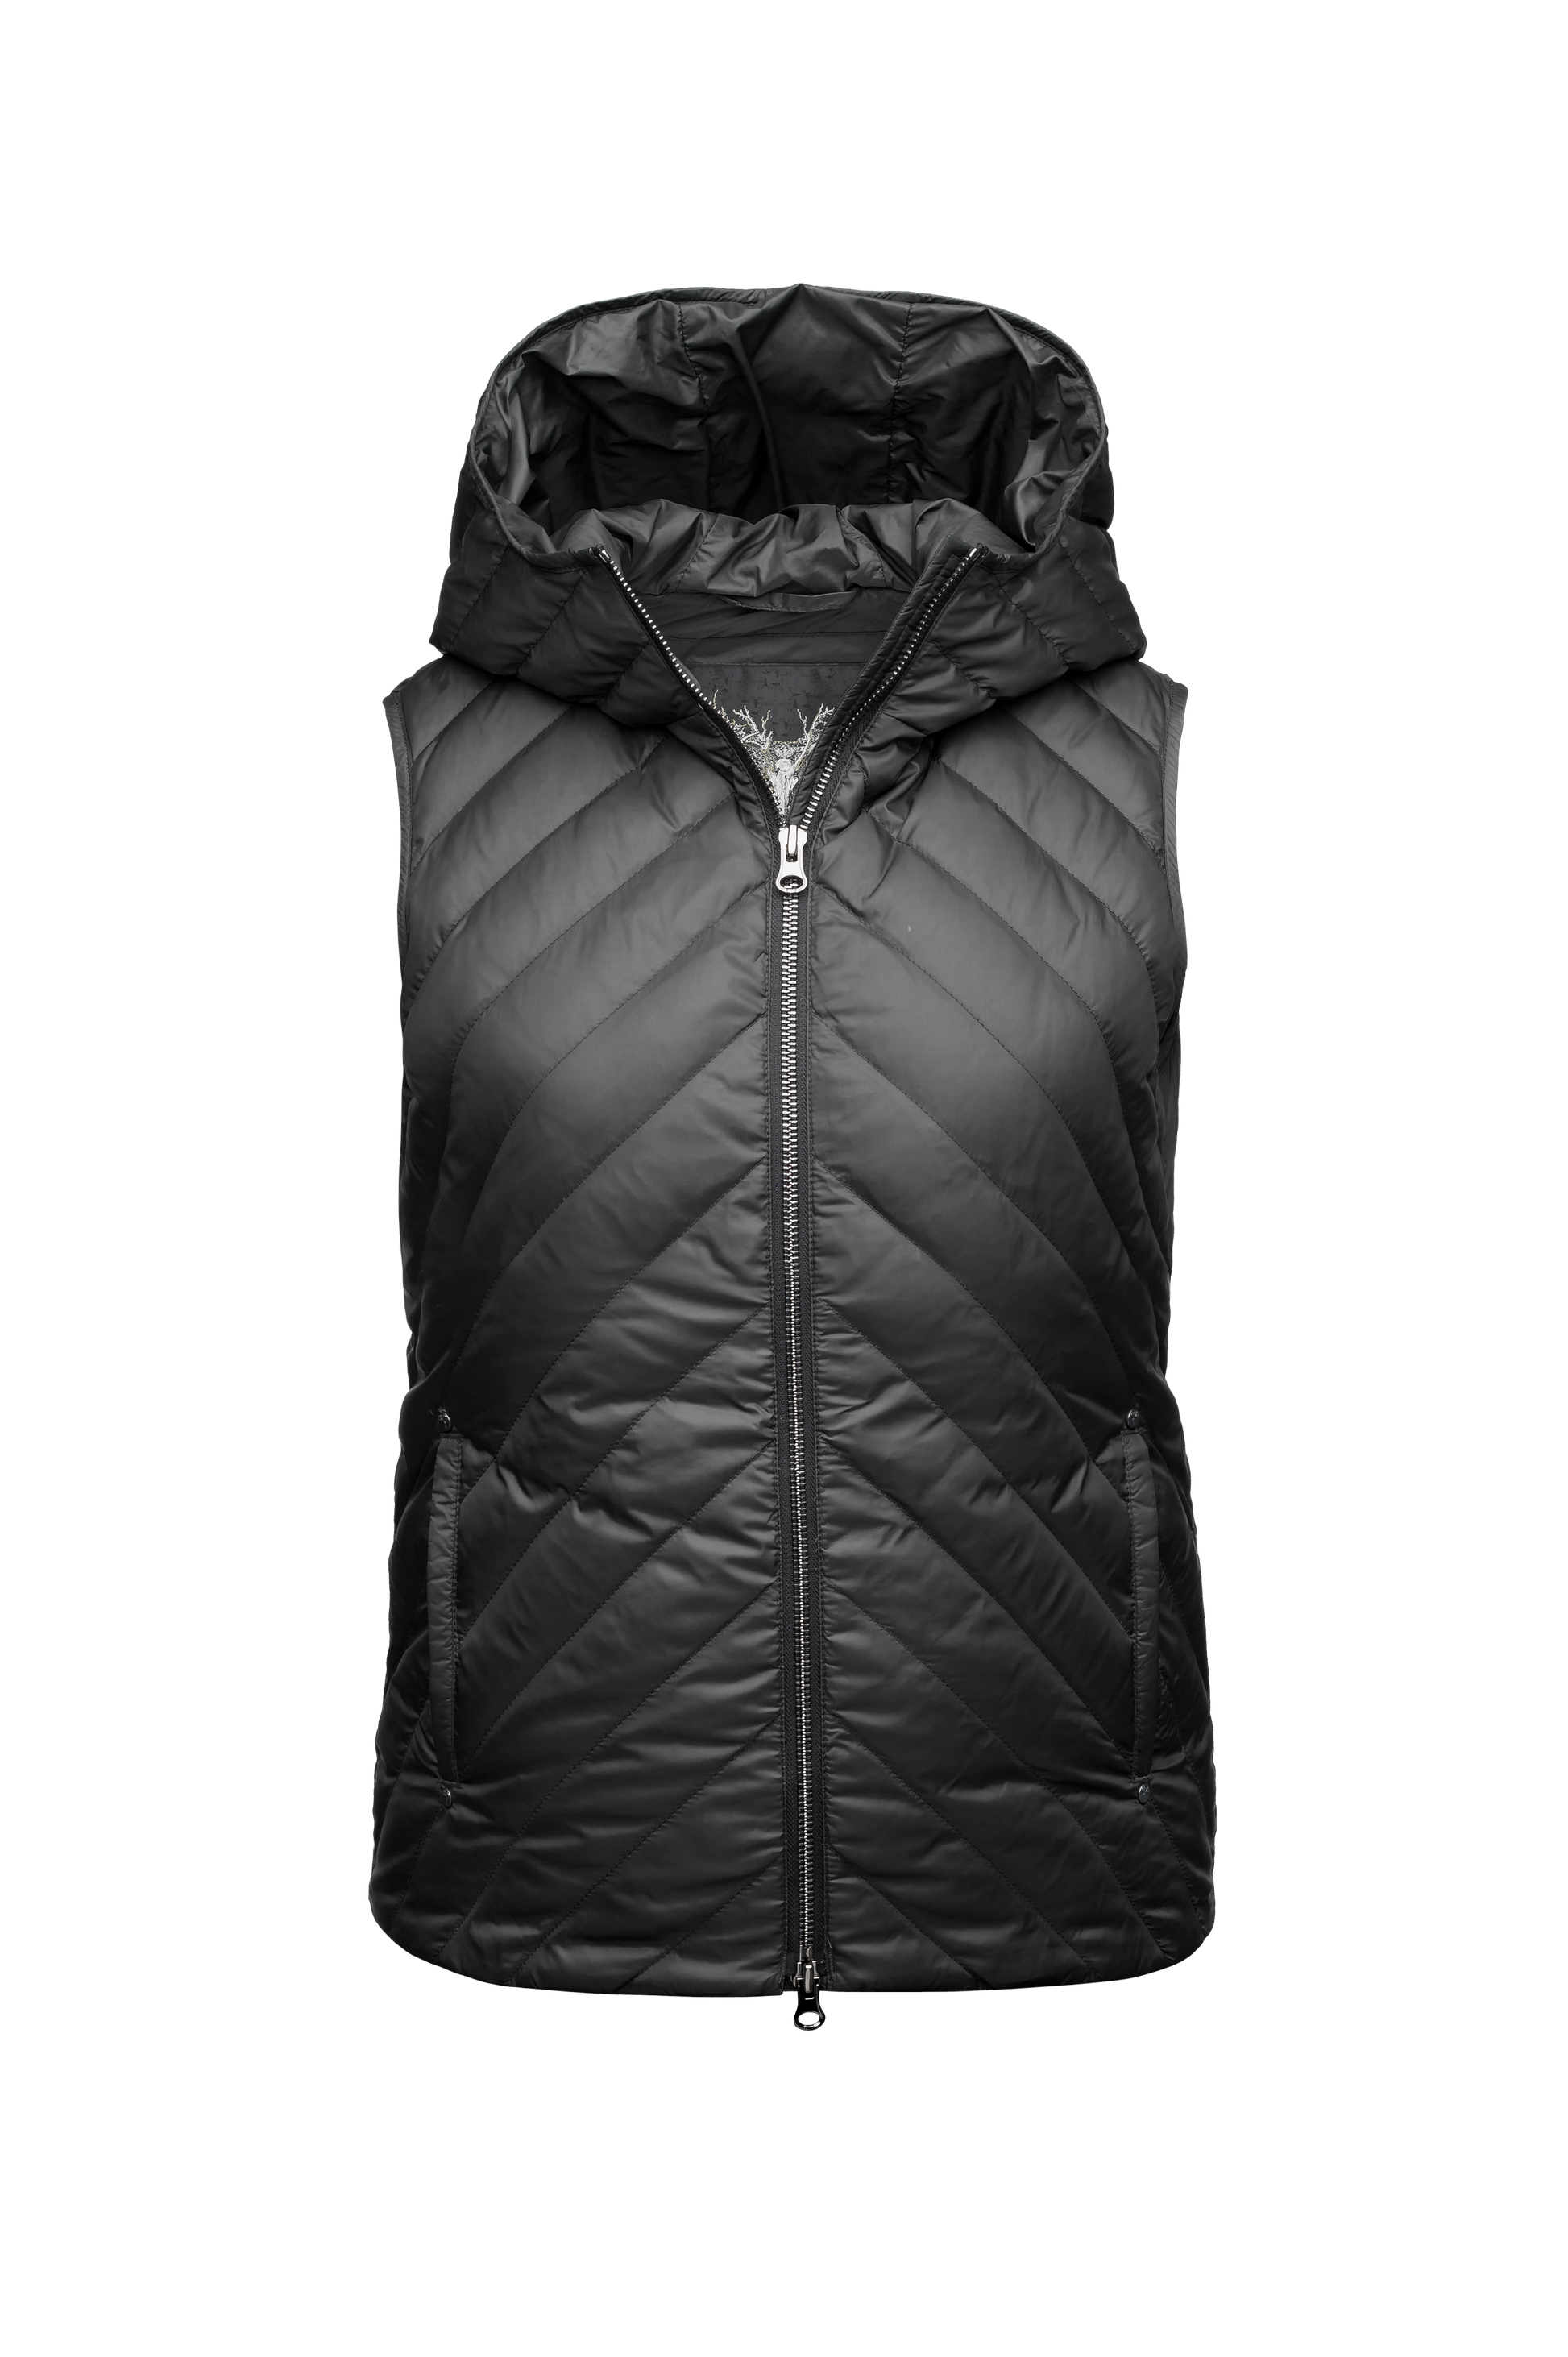 Women's down filled vest with diagonal quilting pattern throughout in Black